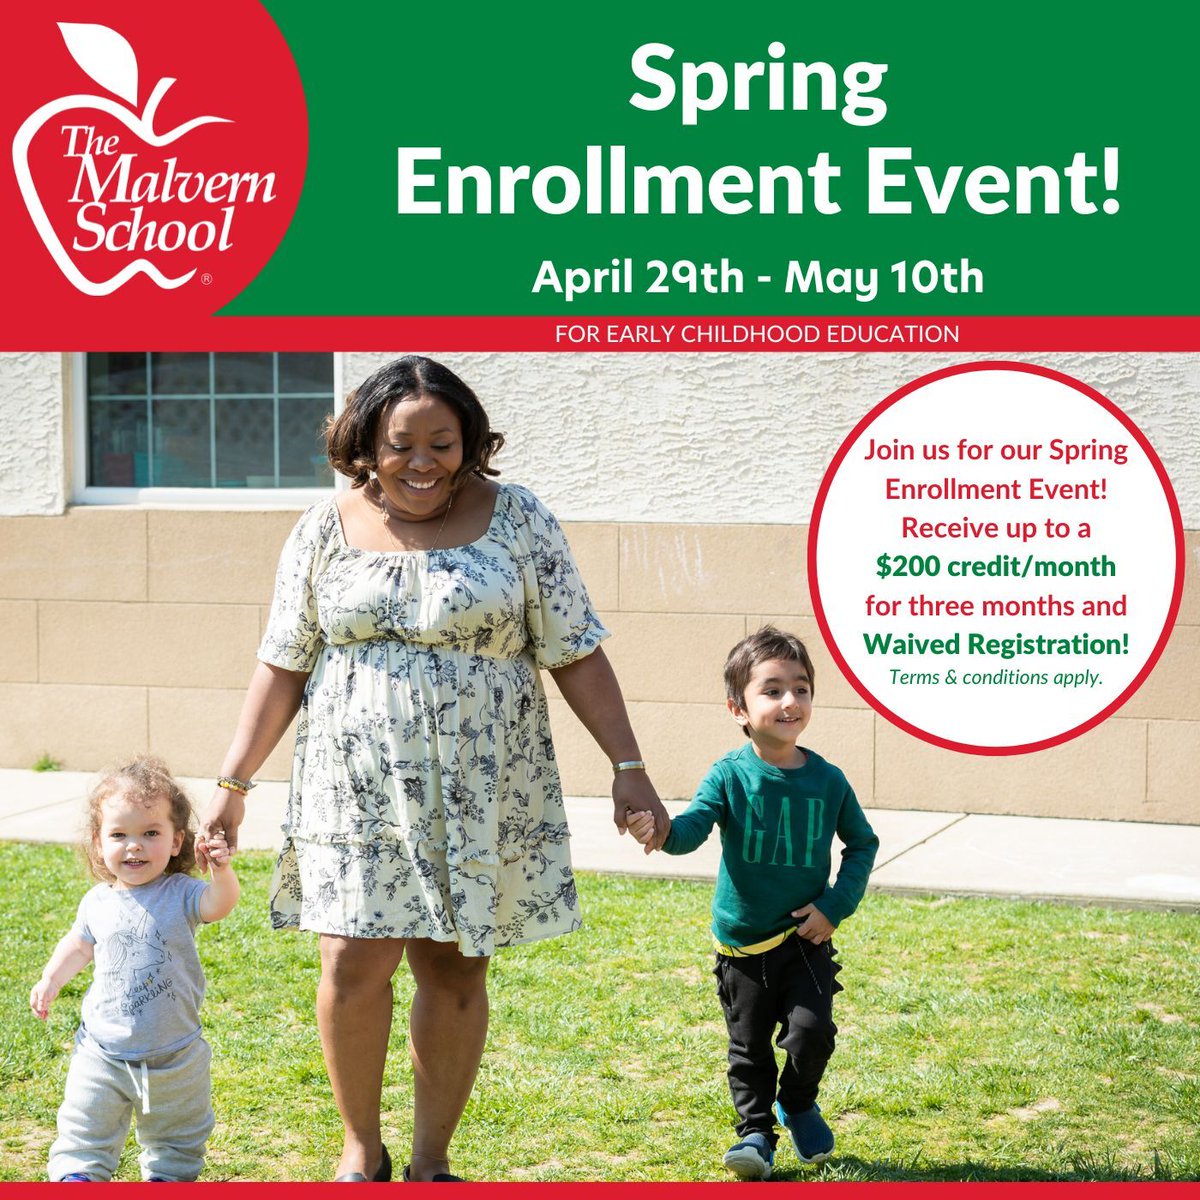 Our Spring Enrollment Event starts today! 😀 Get all the details here! bit.ly/3wfr9bs

#earlylearning #learningthroughplay #playmatters #childcareenrollment #childcare